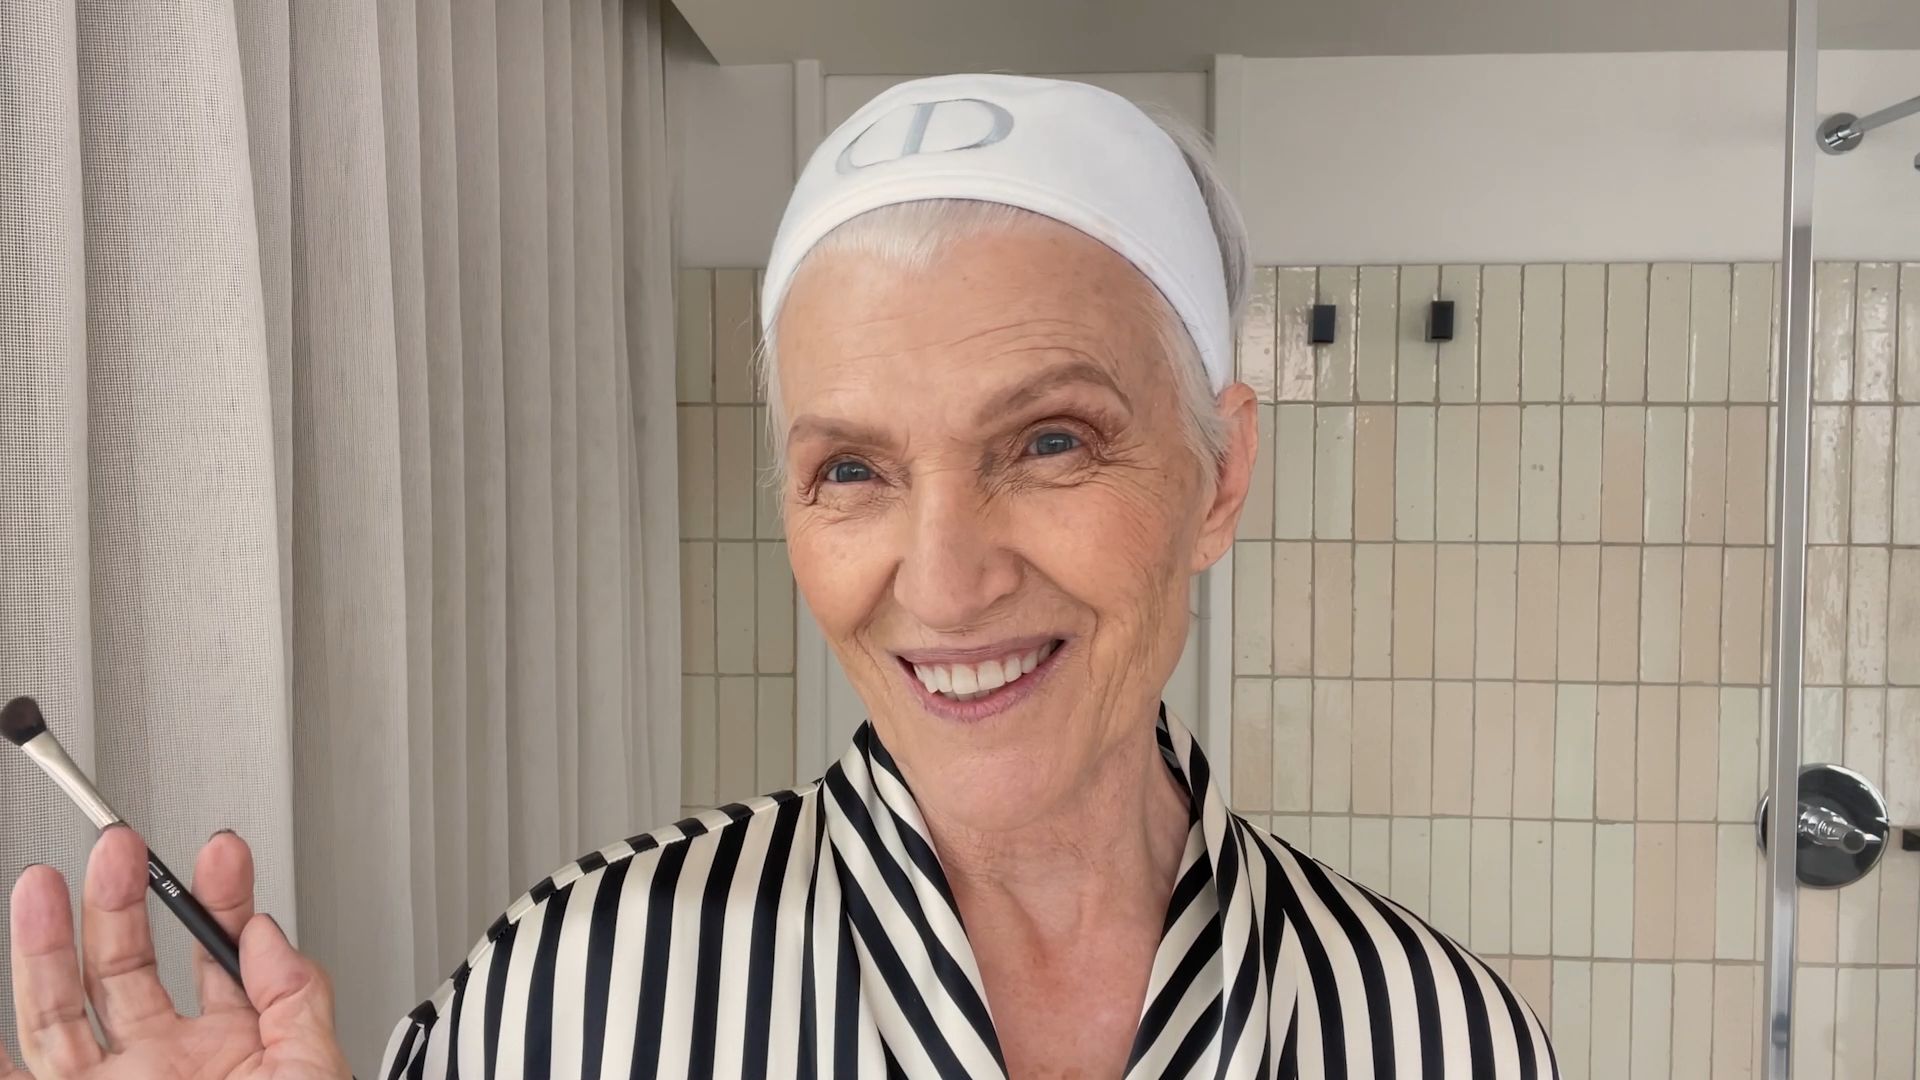 Watch Maye Musk's Guide to Styling Gray Hair, and Skin Care in Your 70s |  Beauty Secrets | Vogue